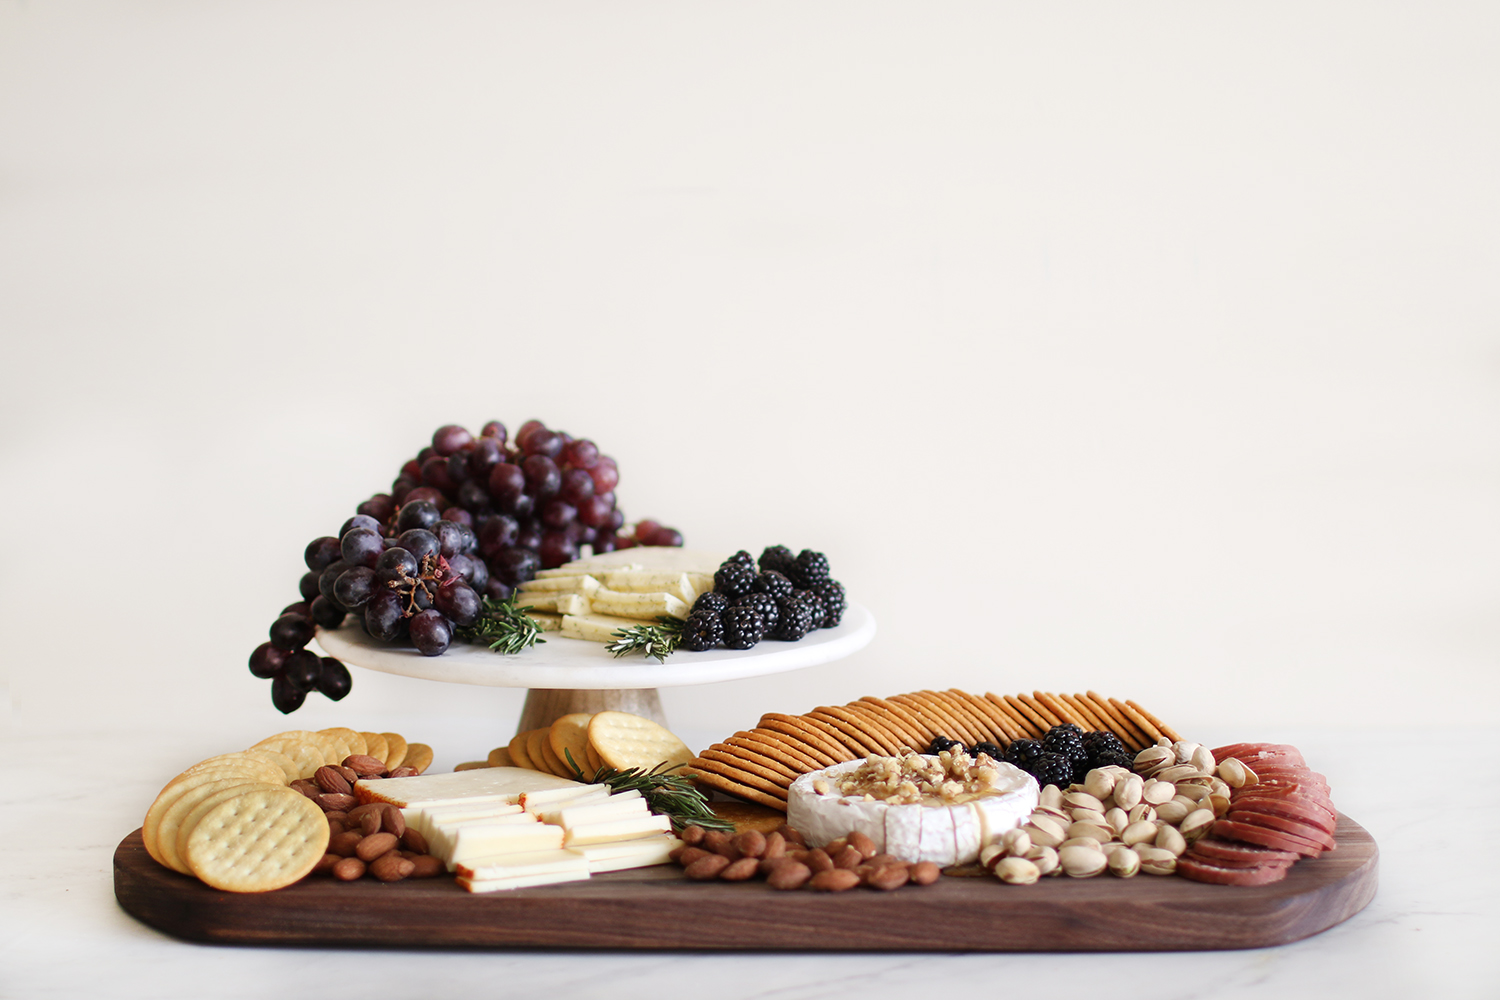 How to make a simple and beautiful charcuterie board. Get all of the ins and outs and how to wow those you are entertaining over at Haus of Layne! #CharcuterieBoard #HowToMakeACharcuterieBoard #BeautifulCharcuterieBoard #SimpleCharcuterieBoard #HowToMakeACheeseBoard #EntertainingTips #PartyIdeas #AppetizerRecipe #EasyAppetizerIdeas